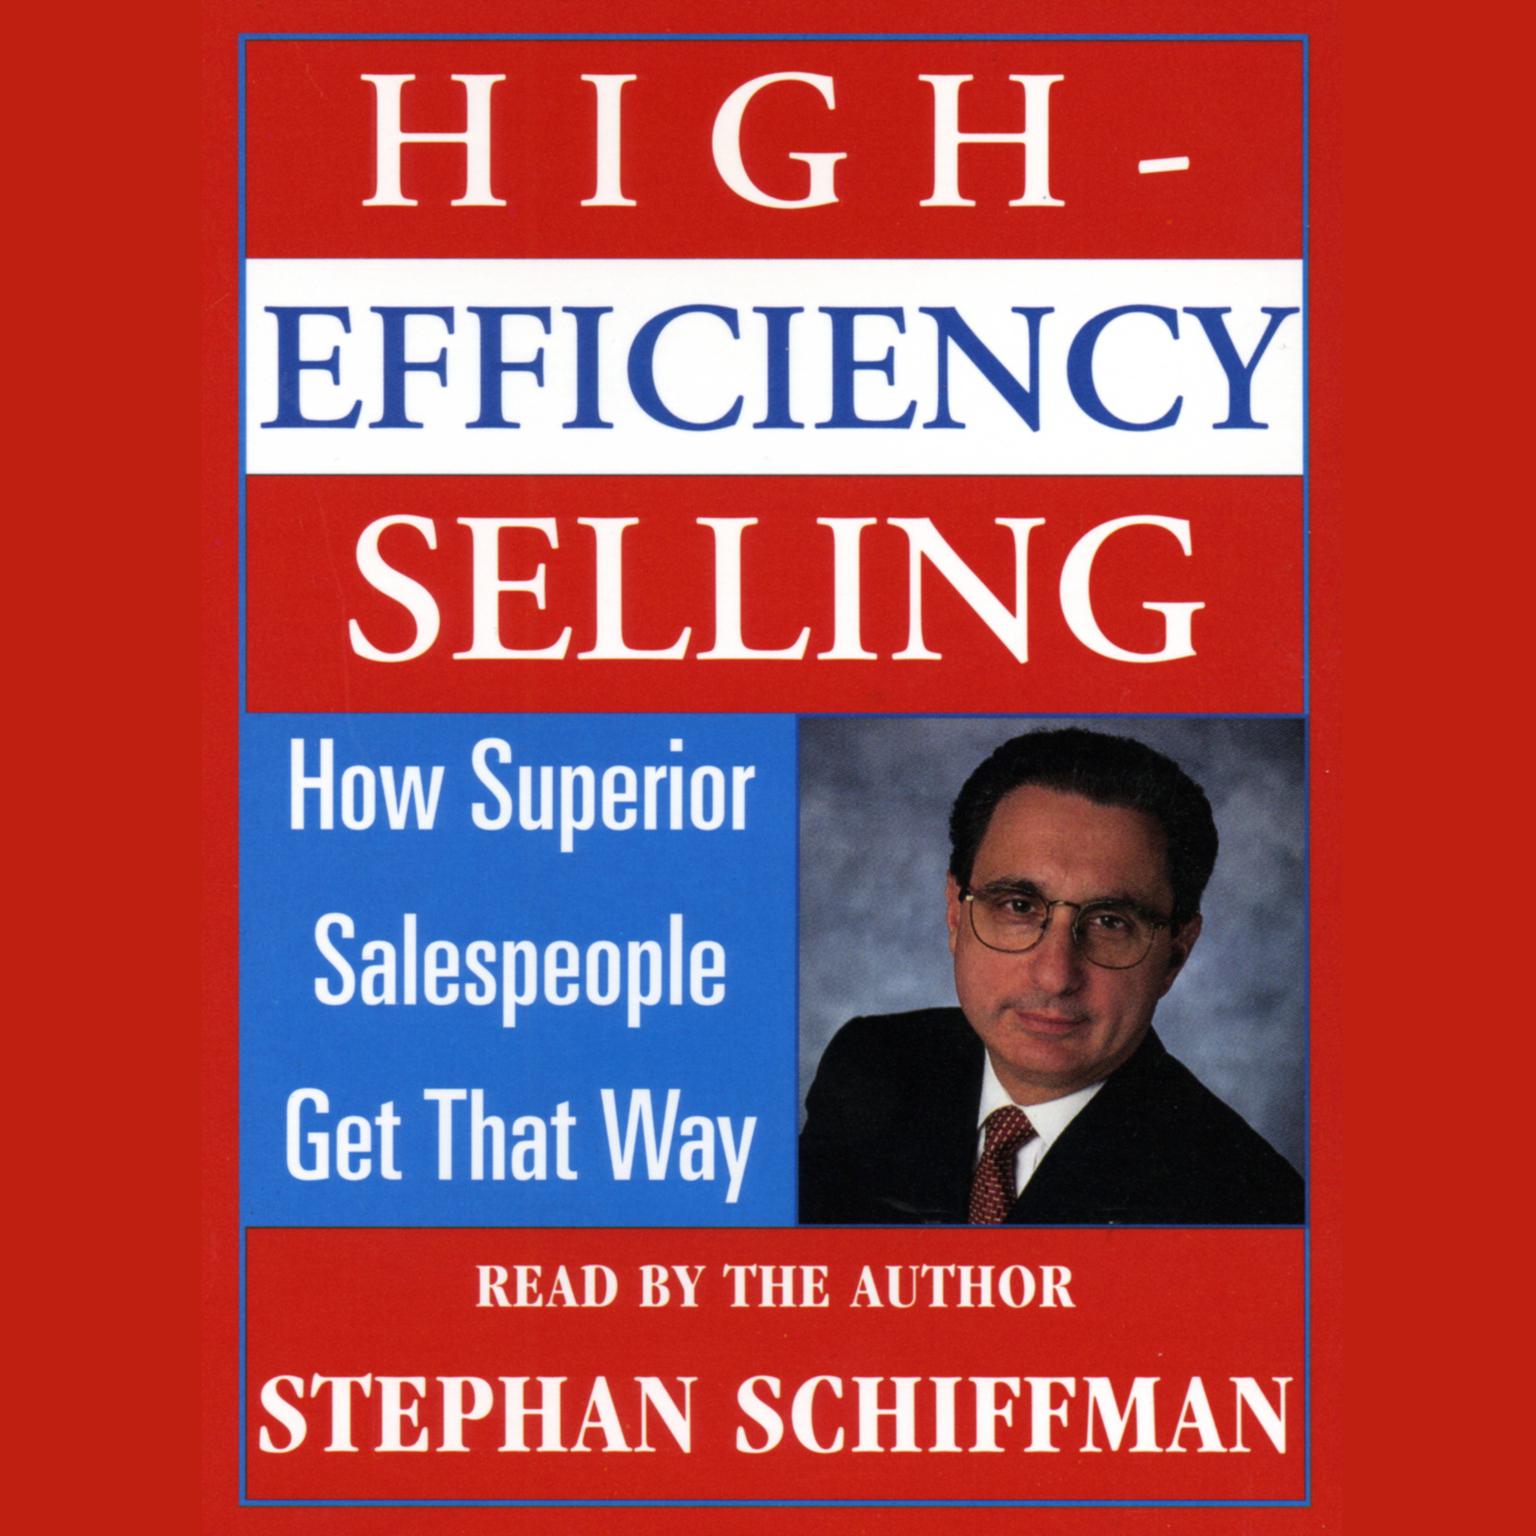 High Efficiency Selling (Abridged): How Superior Salespeople Get That Way Audiobook, by Stephan Schiffman